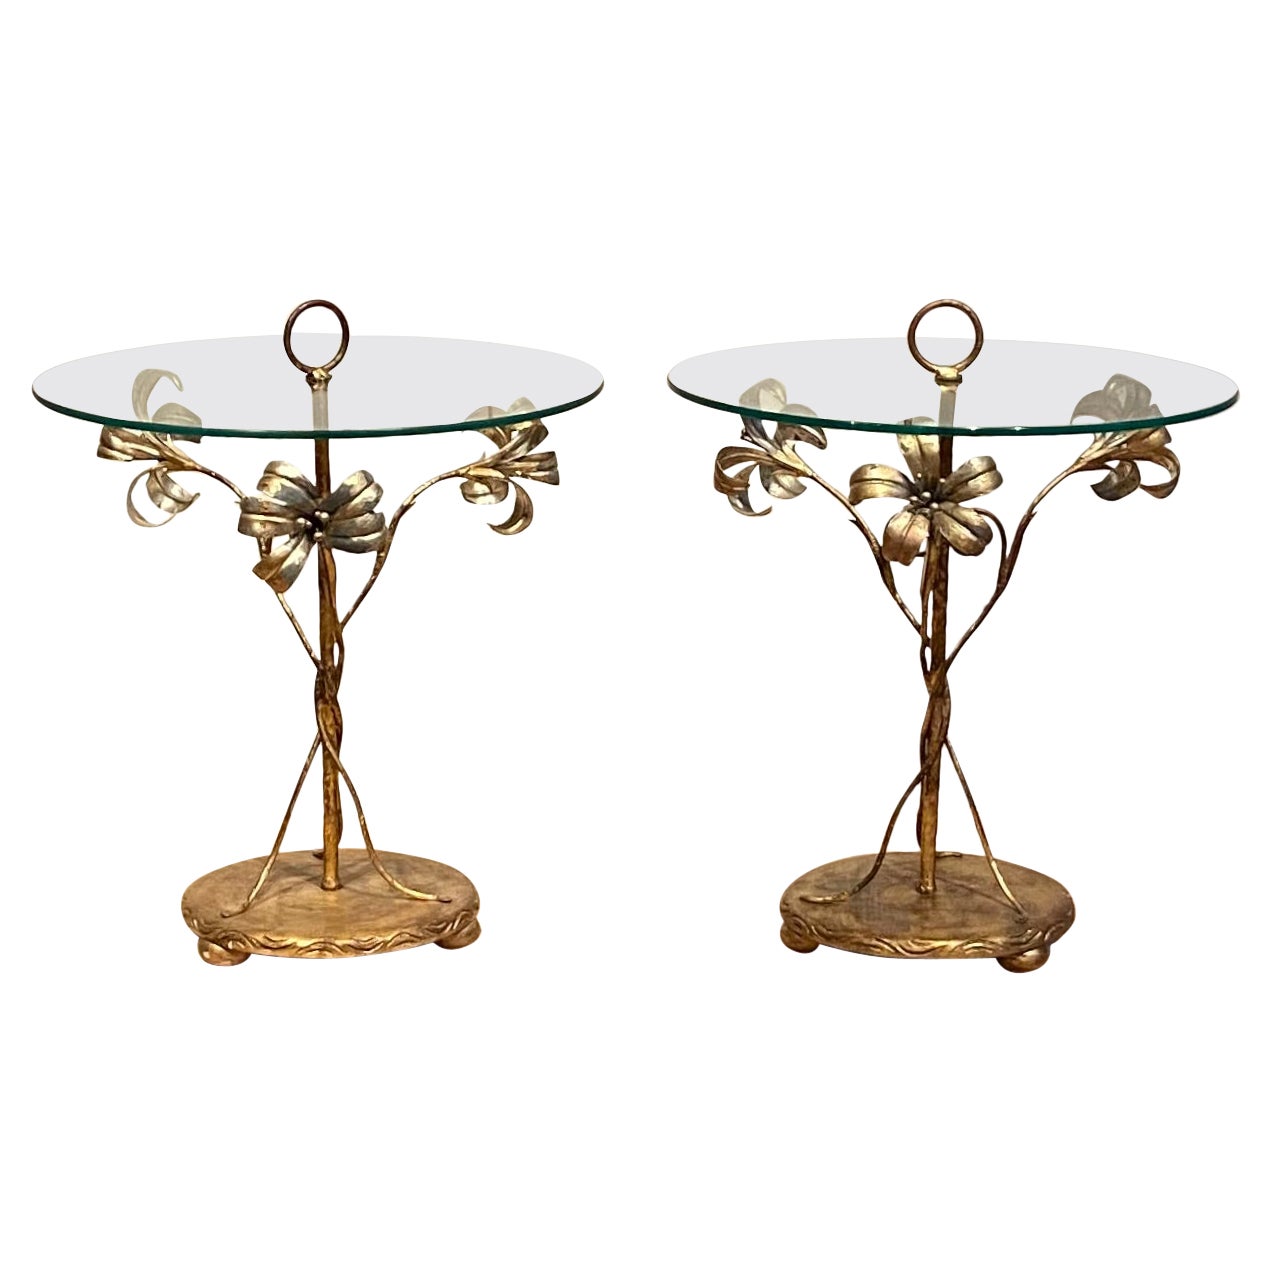 Palladia, a pair of gilded cocktail tables